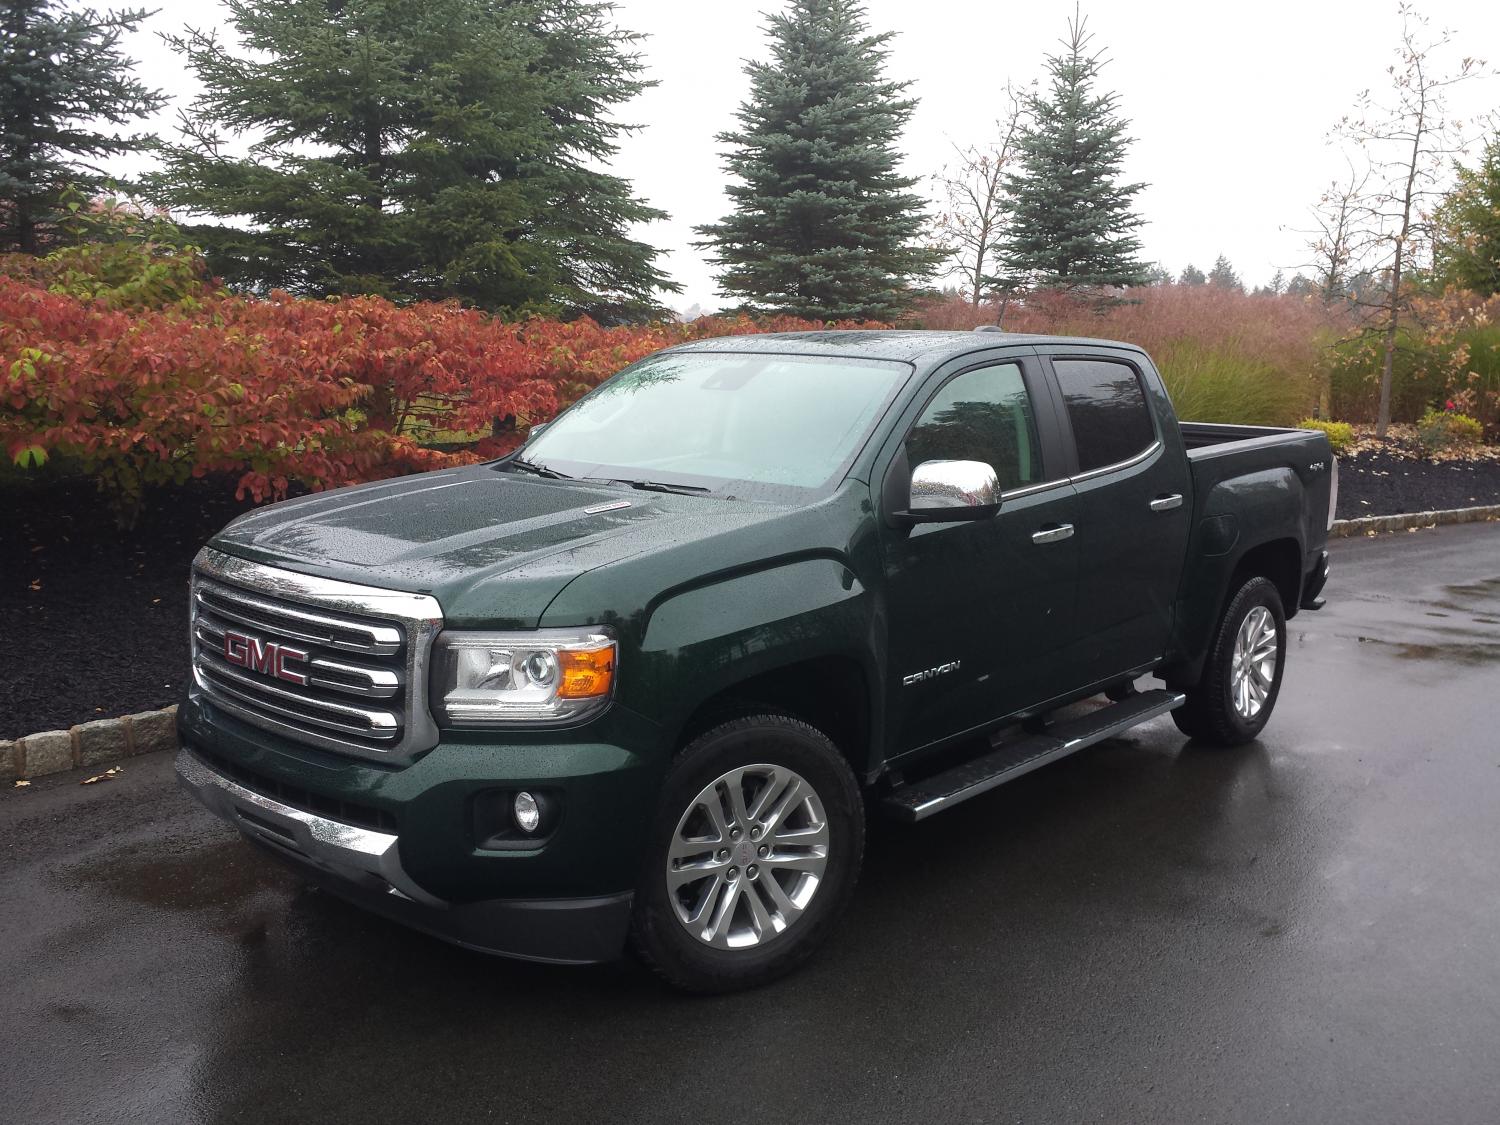 More information about "GMC Canyon, Chevy Colorado Rated Most Fuel Efficient Trucks"